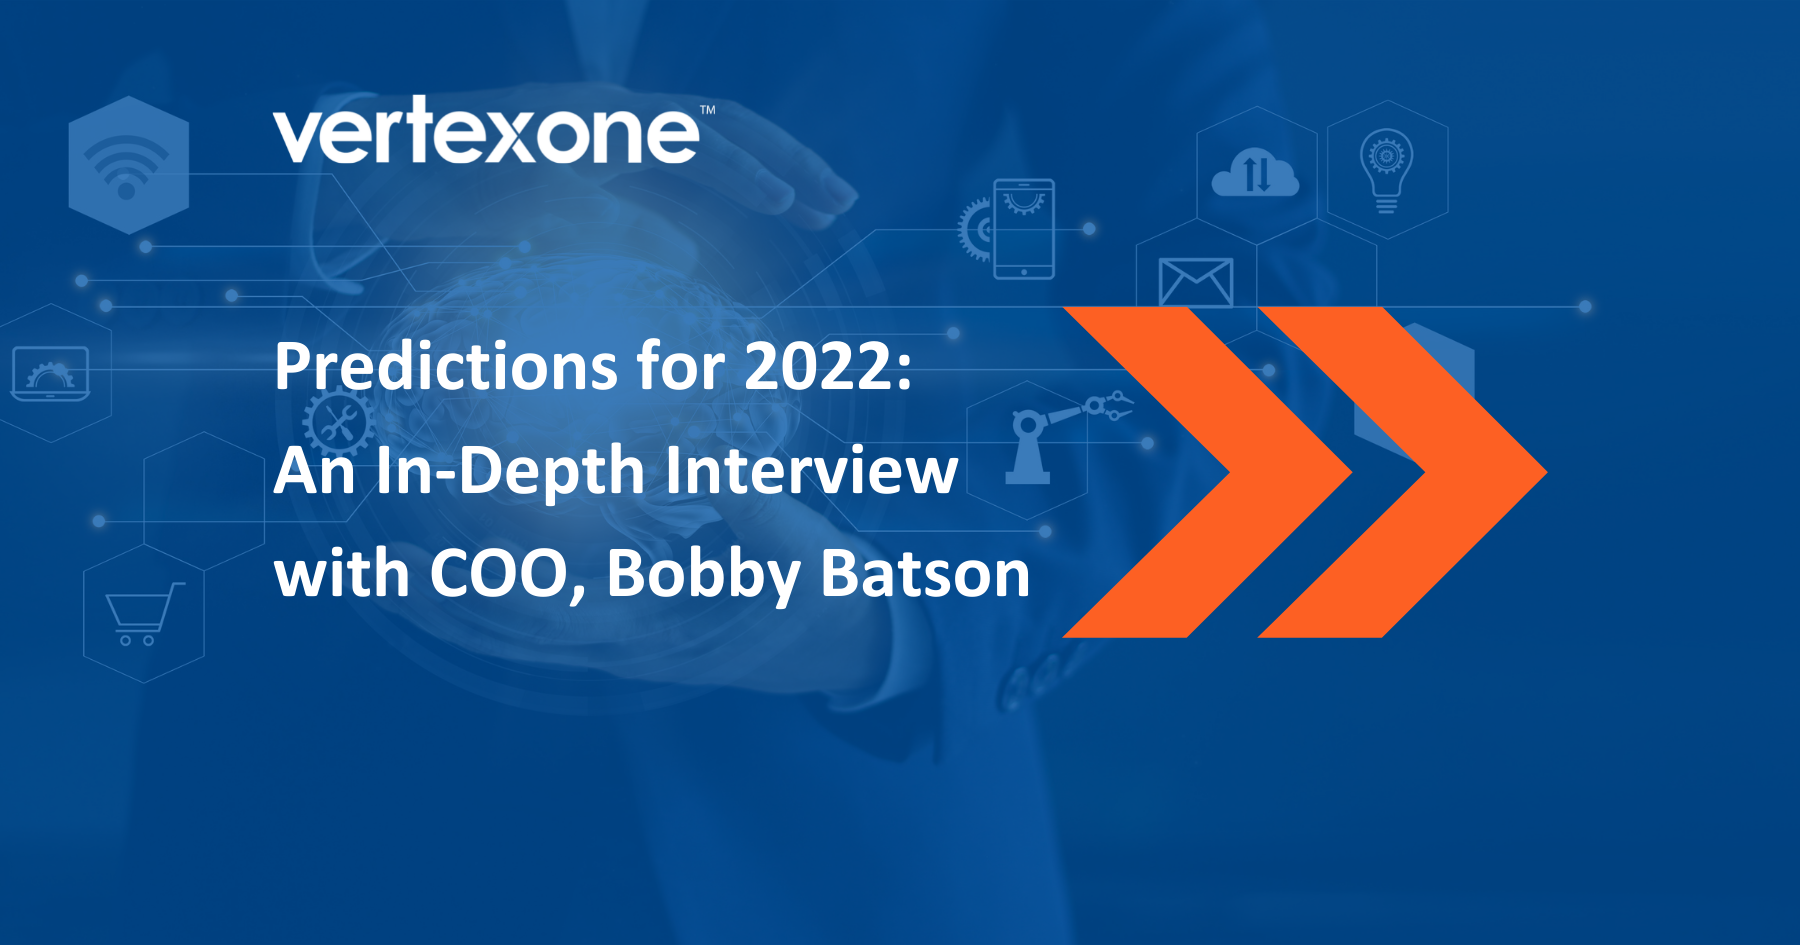 Predictions for 2022: An In-Depth Interview with COO, Bobby Batson